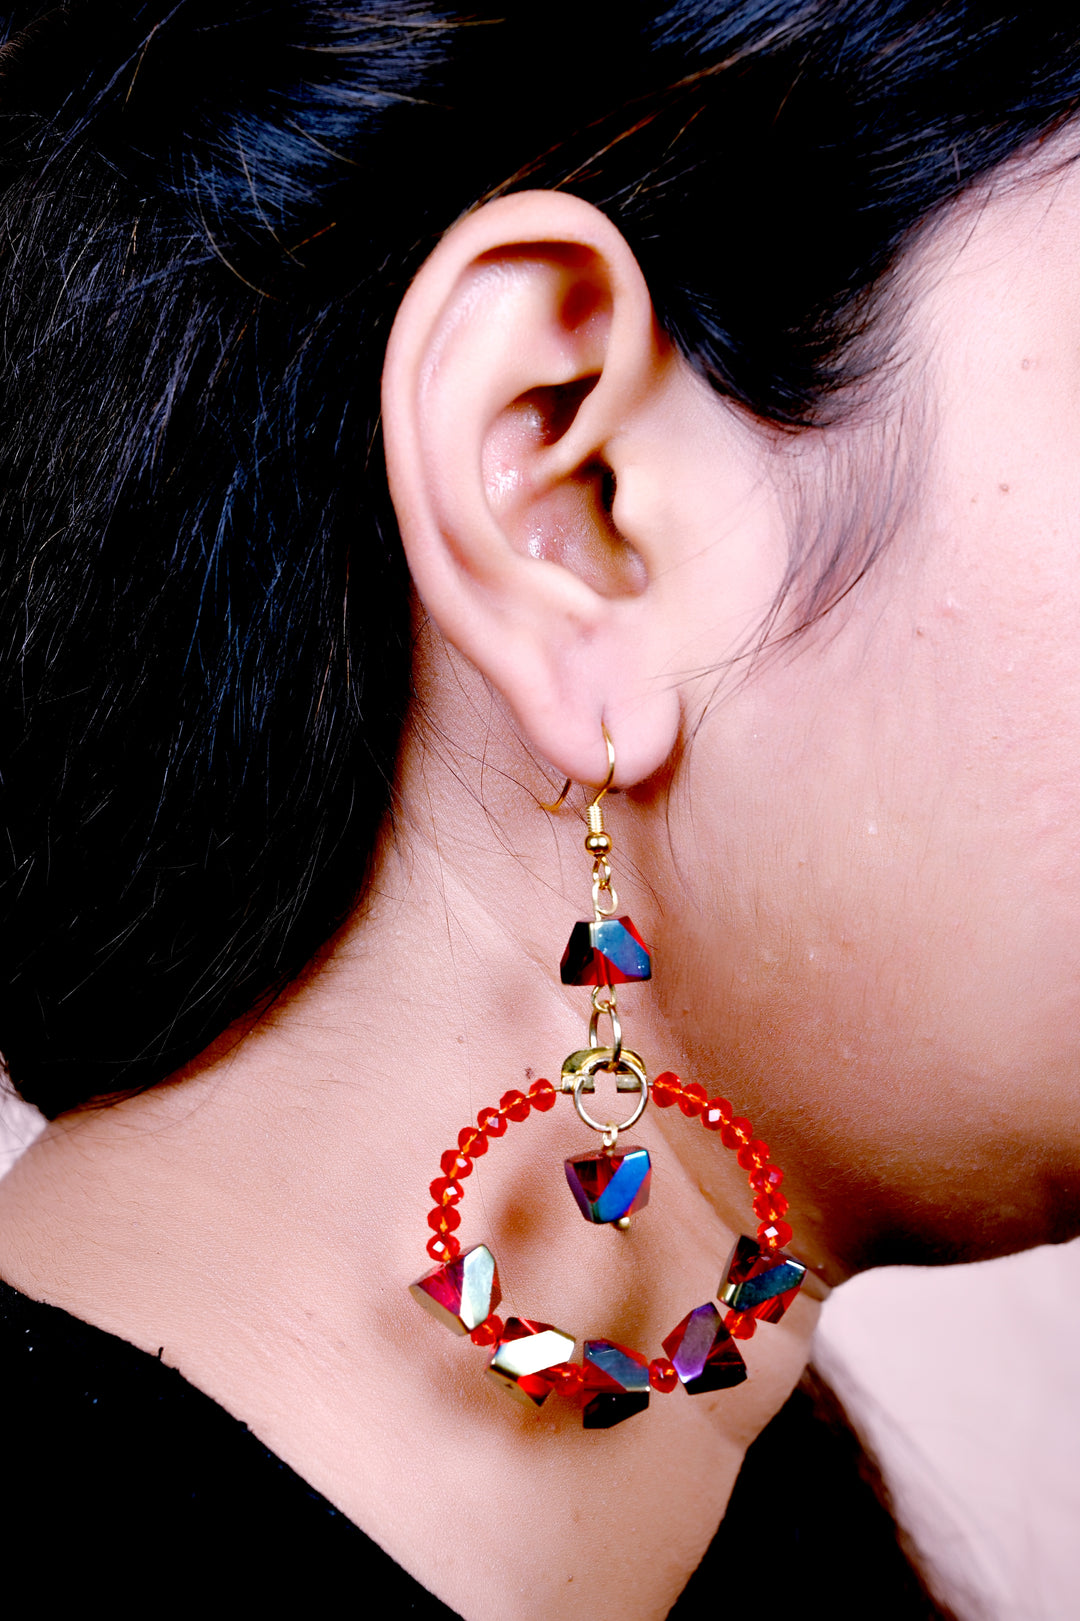 Red Colored Multifaceted Glass Beads Earring Strung In Metal Hoop